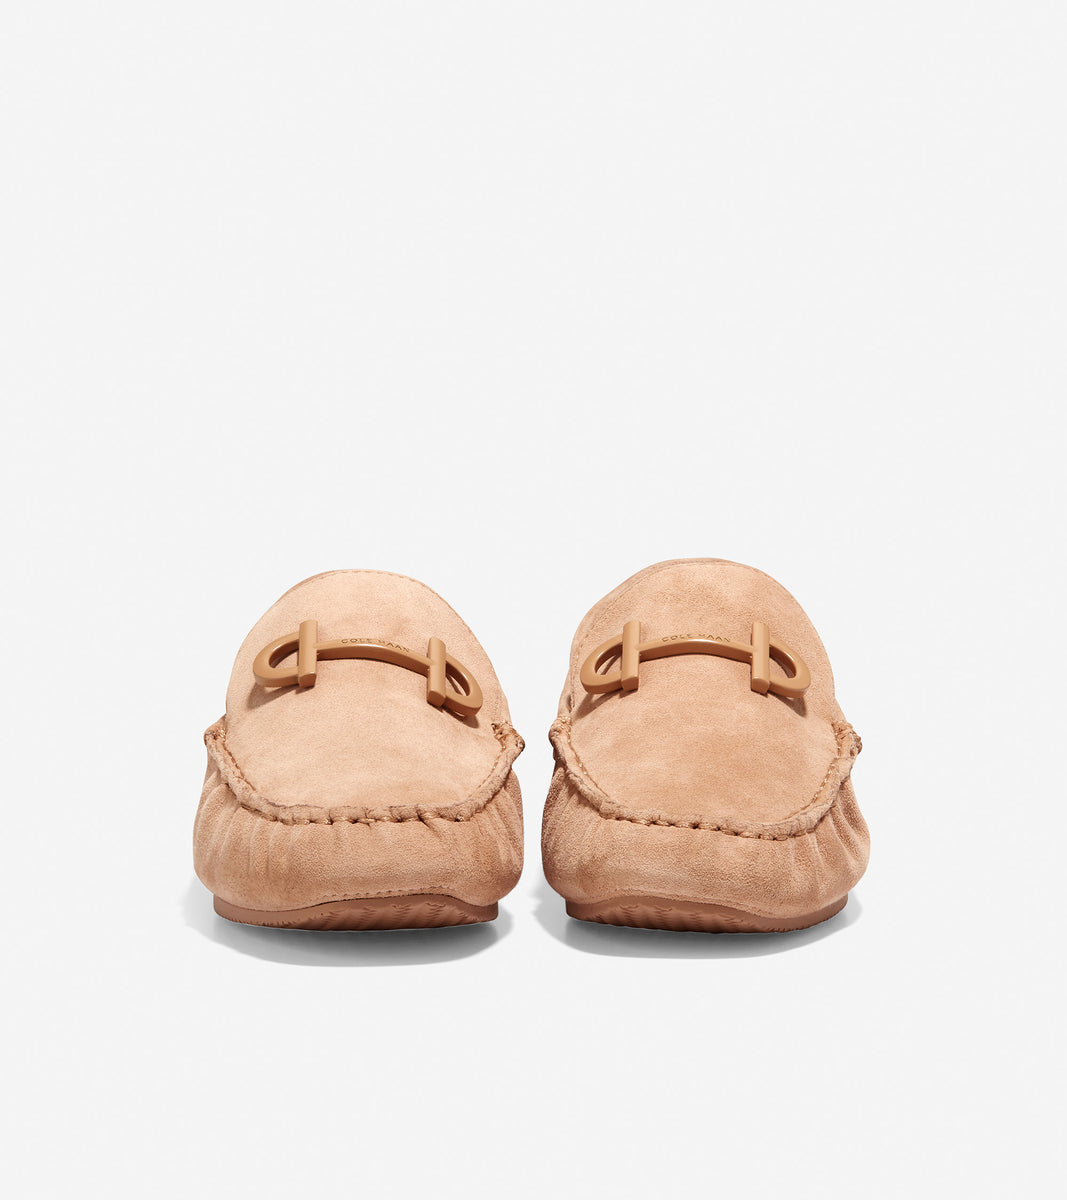 w26056-Tully Driver-Blush Tan Suede